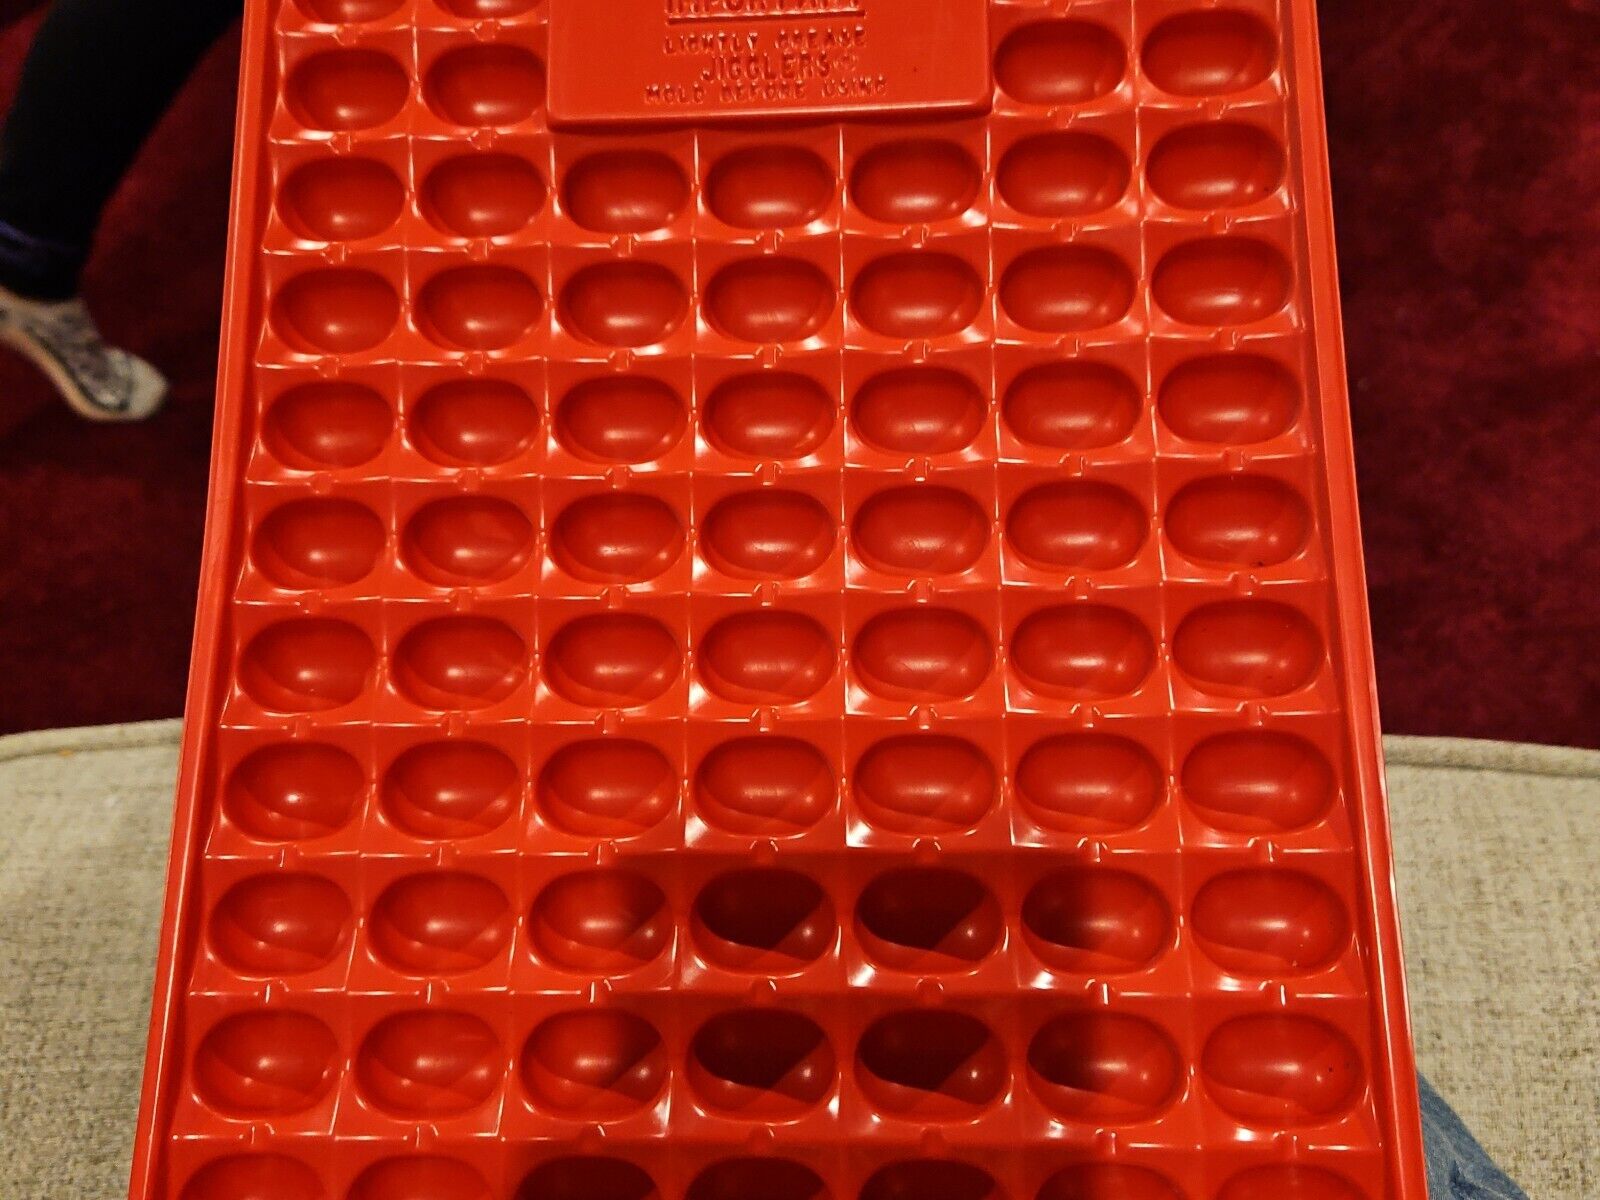 Vtg Jell O Beans Mold Tray Makes 82 JellO Beans Shots or Jigglers RED